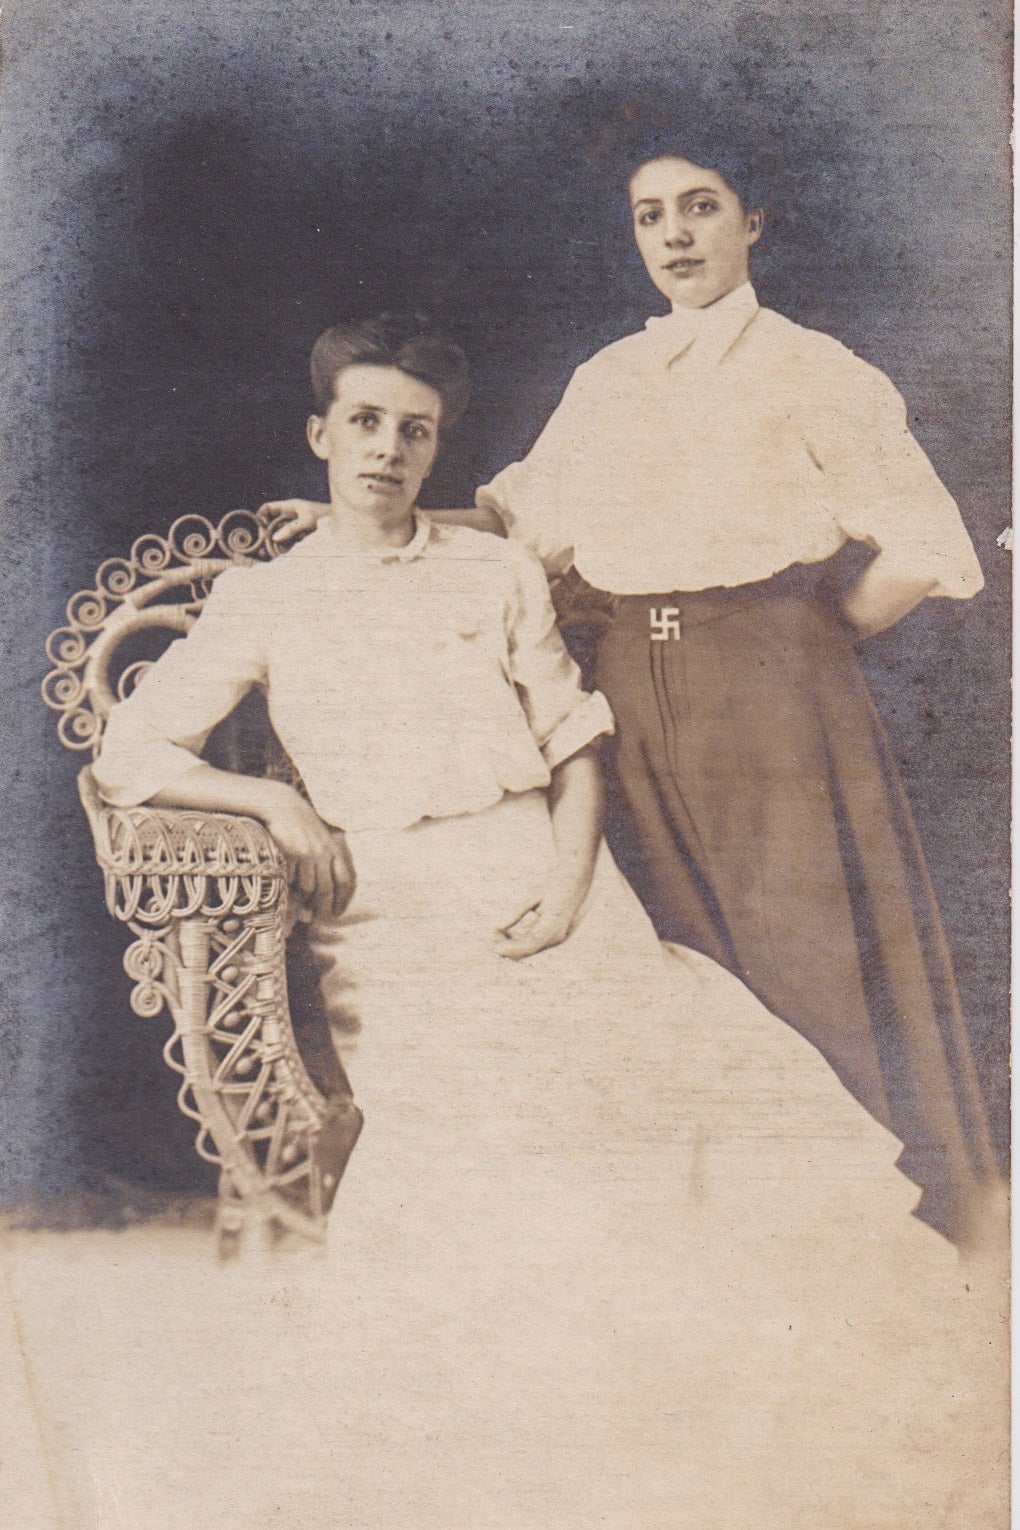 Two young women proudly wearing the swastika logo of the Afrikaner